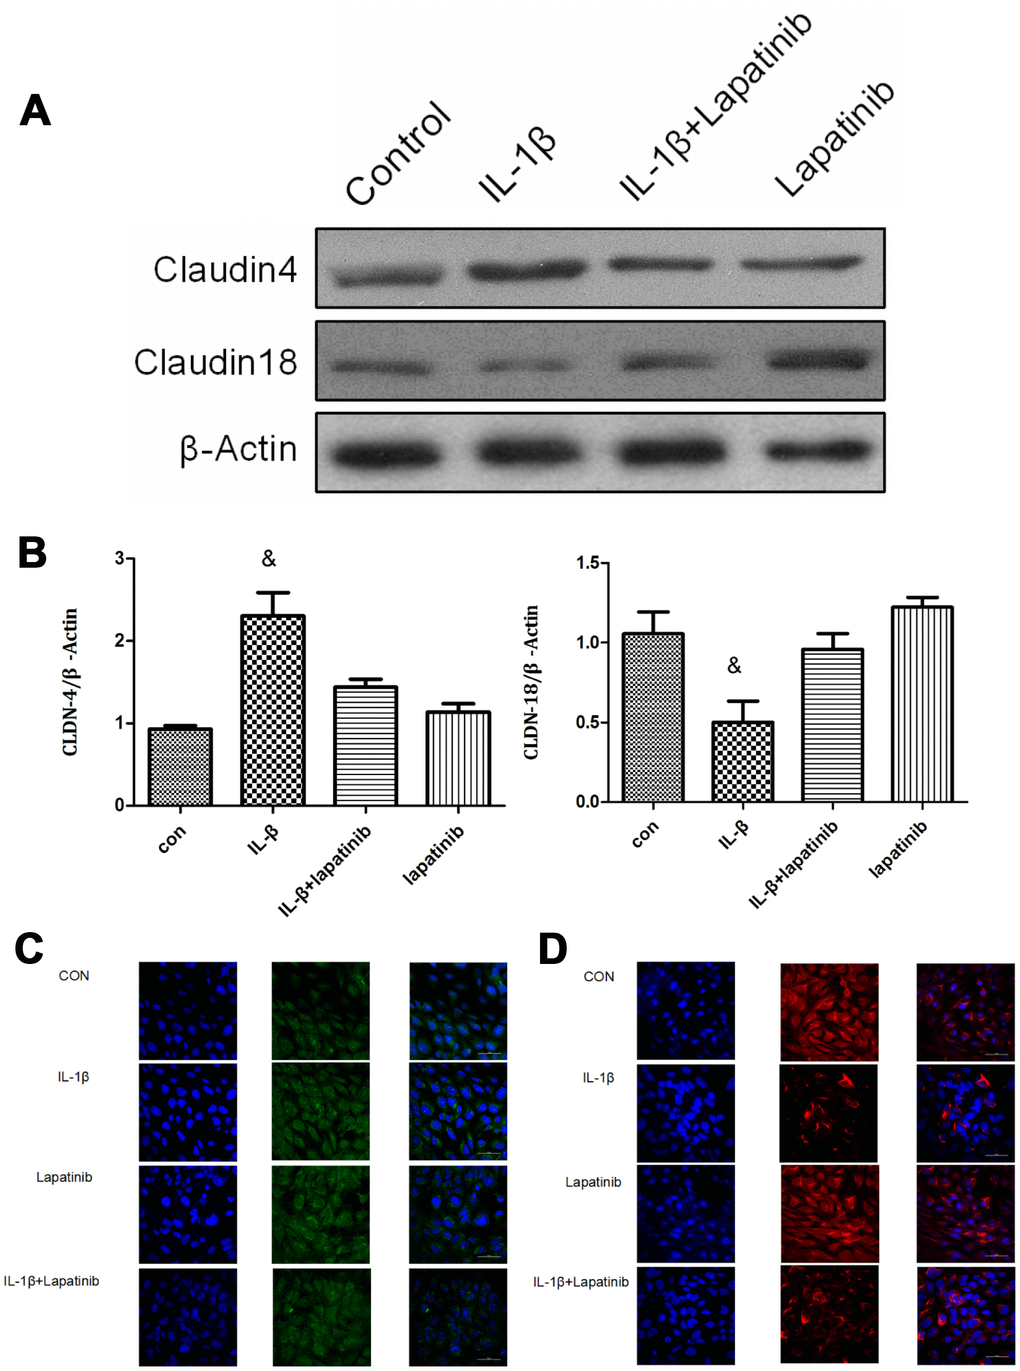 Analysis of claudin4/18 expression and localization. (A, B) The expression of claudin4 expression was significantly up-regulated while the expression of claudin18 was significantly down-regulated in the IL-1β group. &, P C) Claudin4 immunofluorescence was increased significantly in the cell membrane localization. (D) Claudin18 immunofluorescence results was reduced significantly in cell membrane localization.